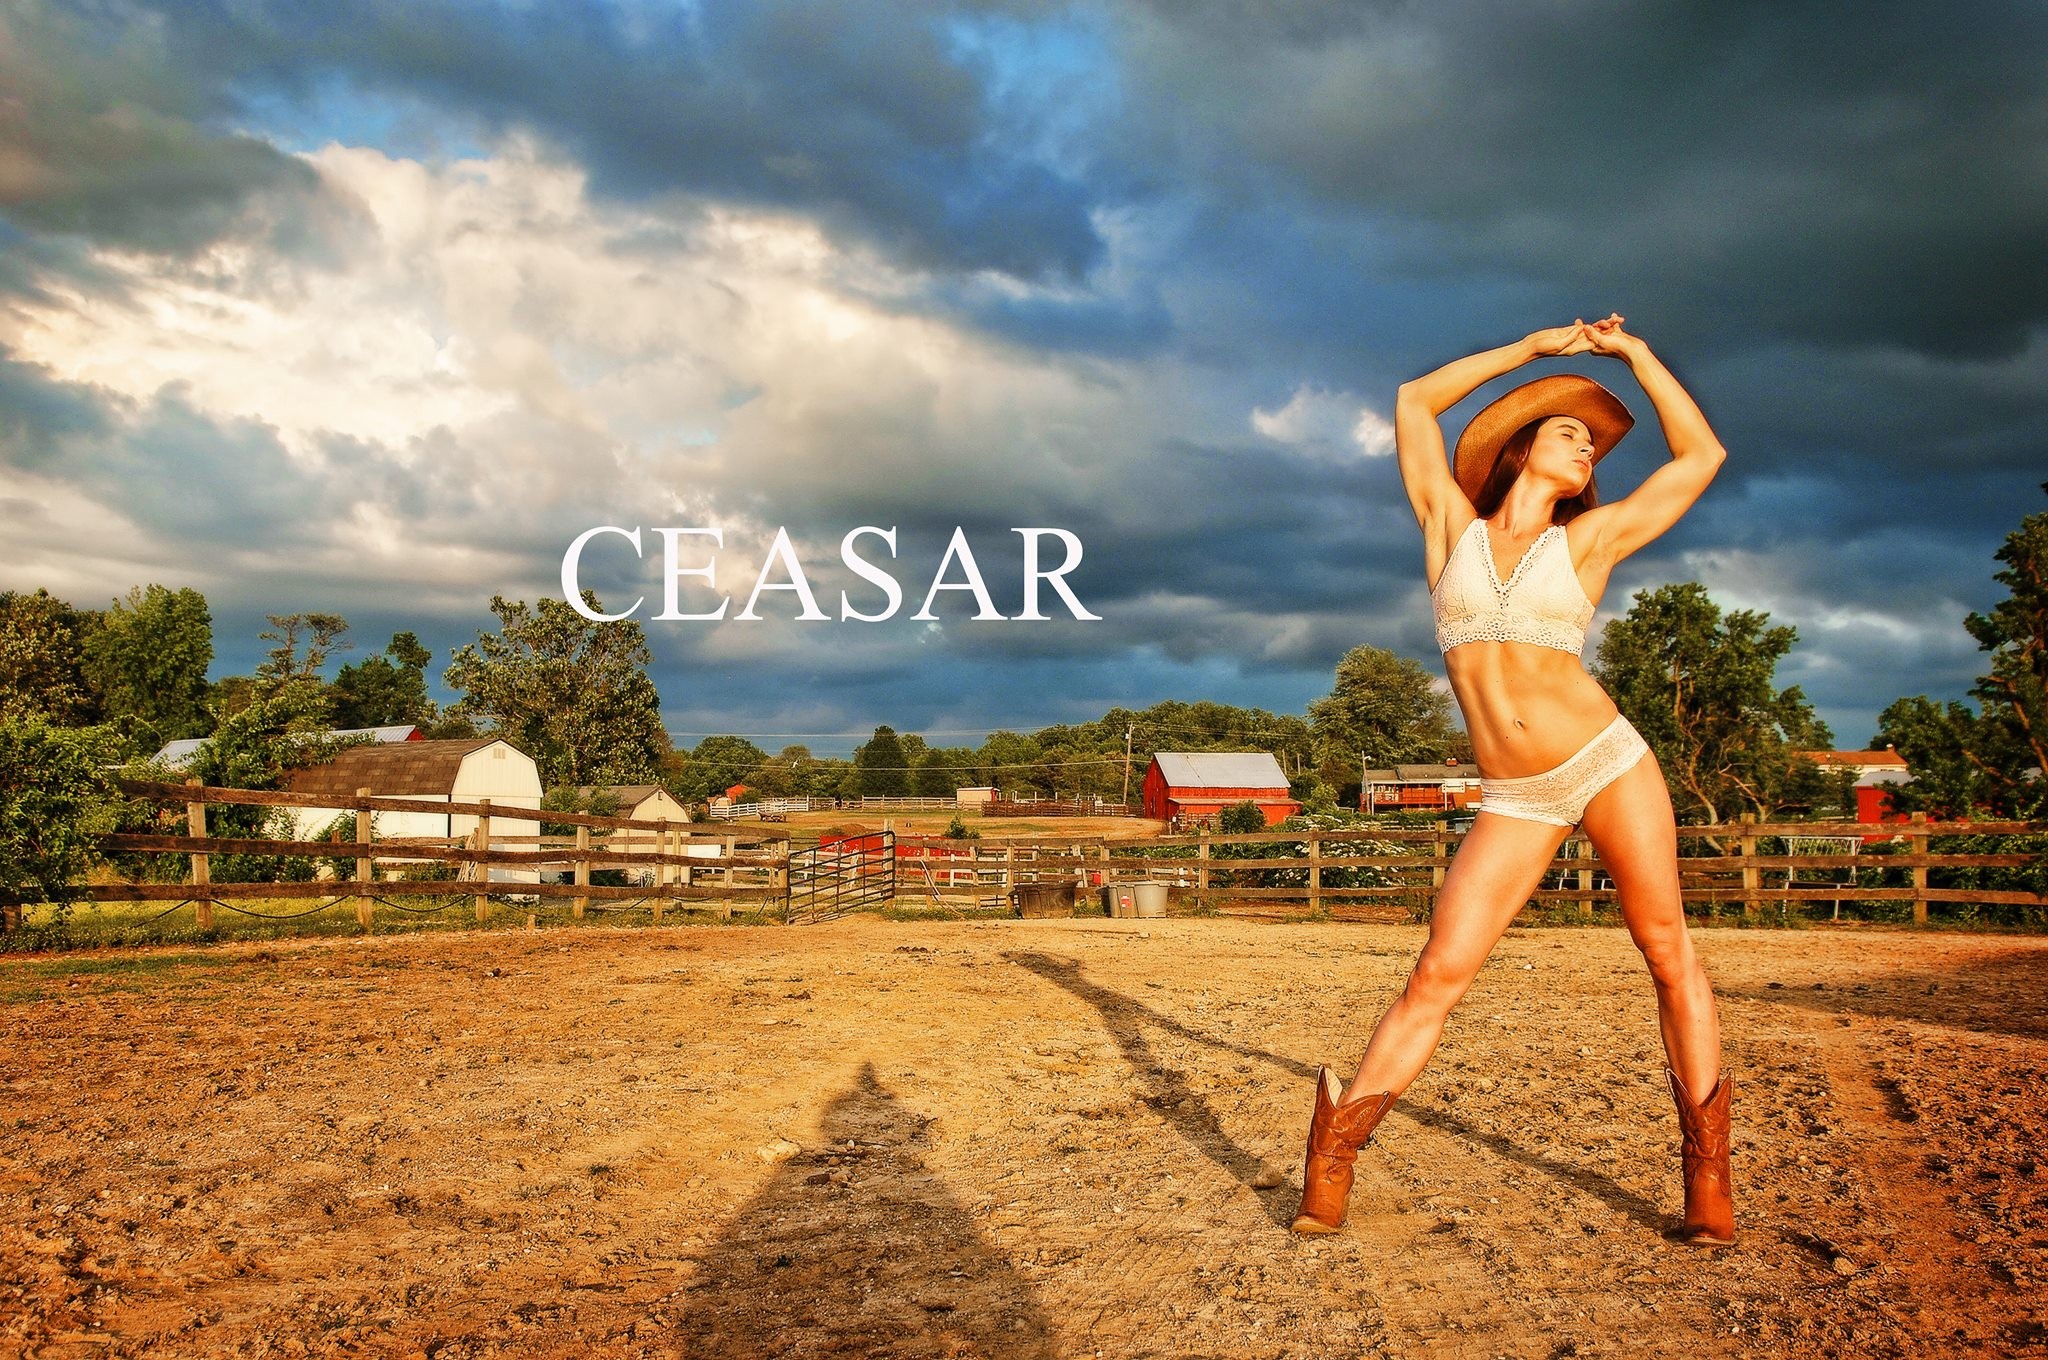 People 2048x1360 women model lingerie Ceasar Ron standing hat women with hats panties arms up boots women outdoors outdoors closed eyes